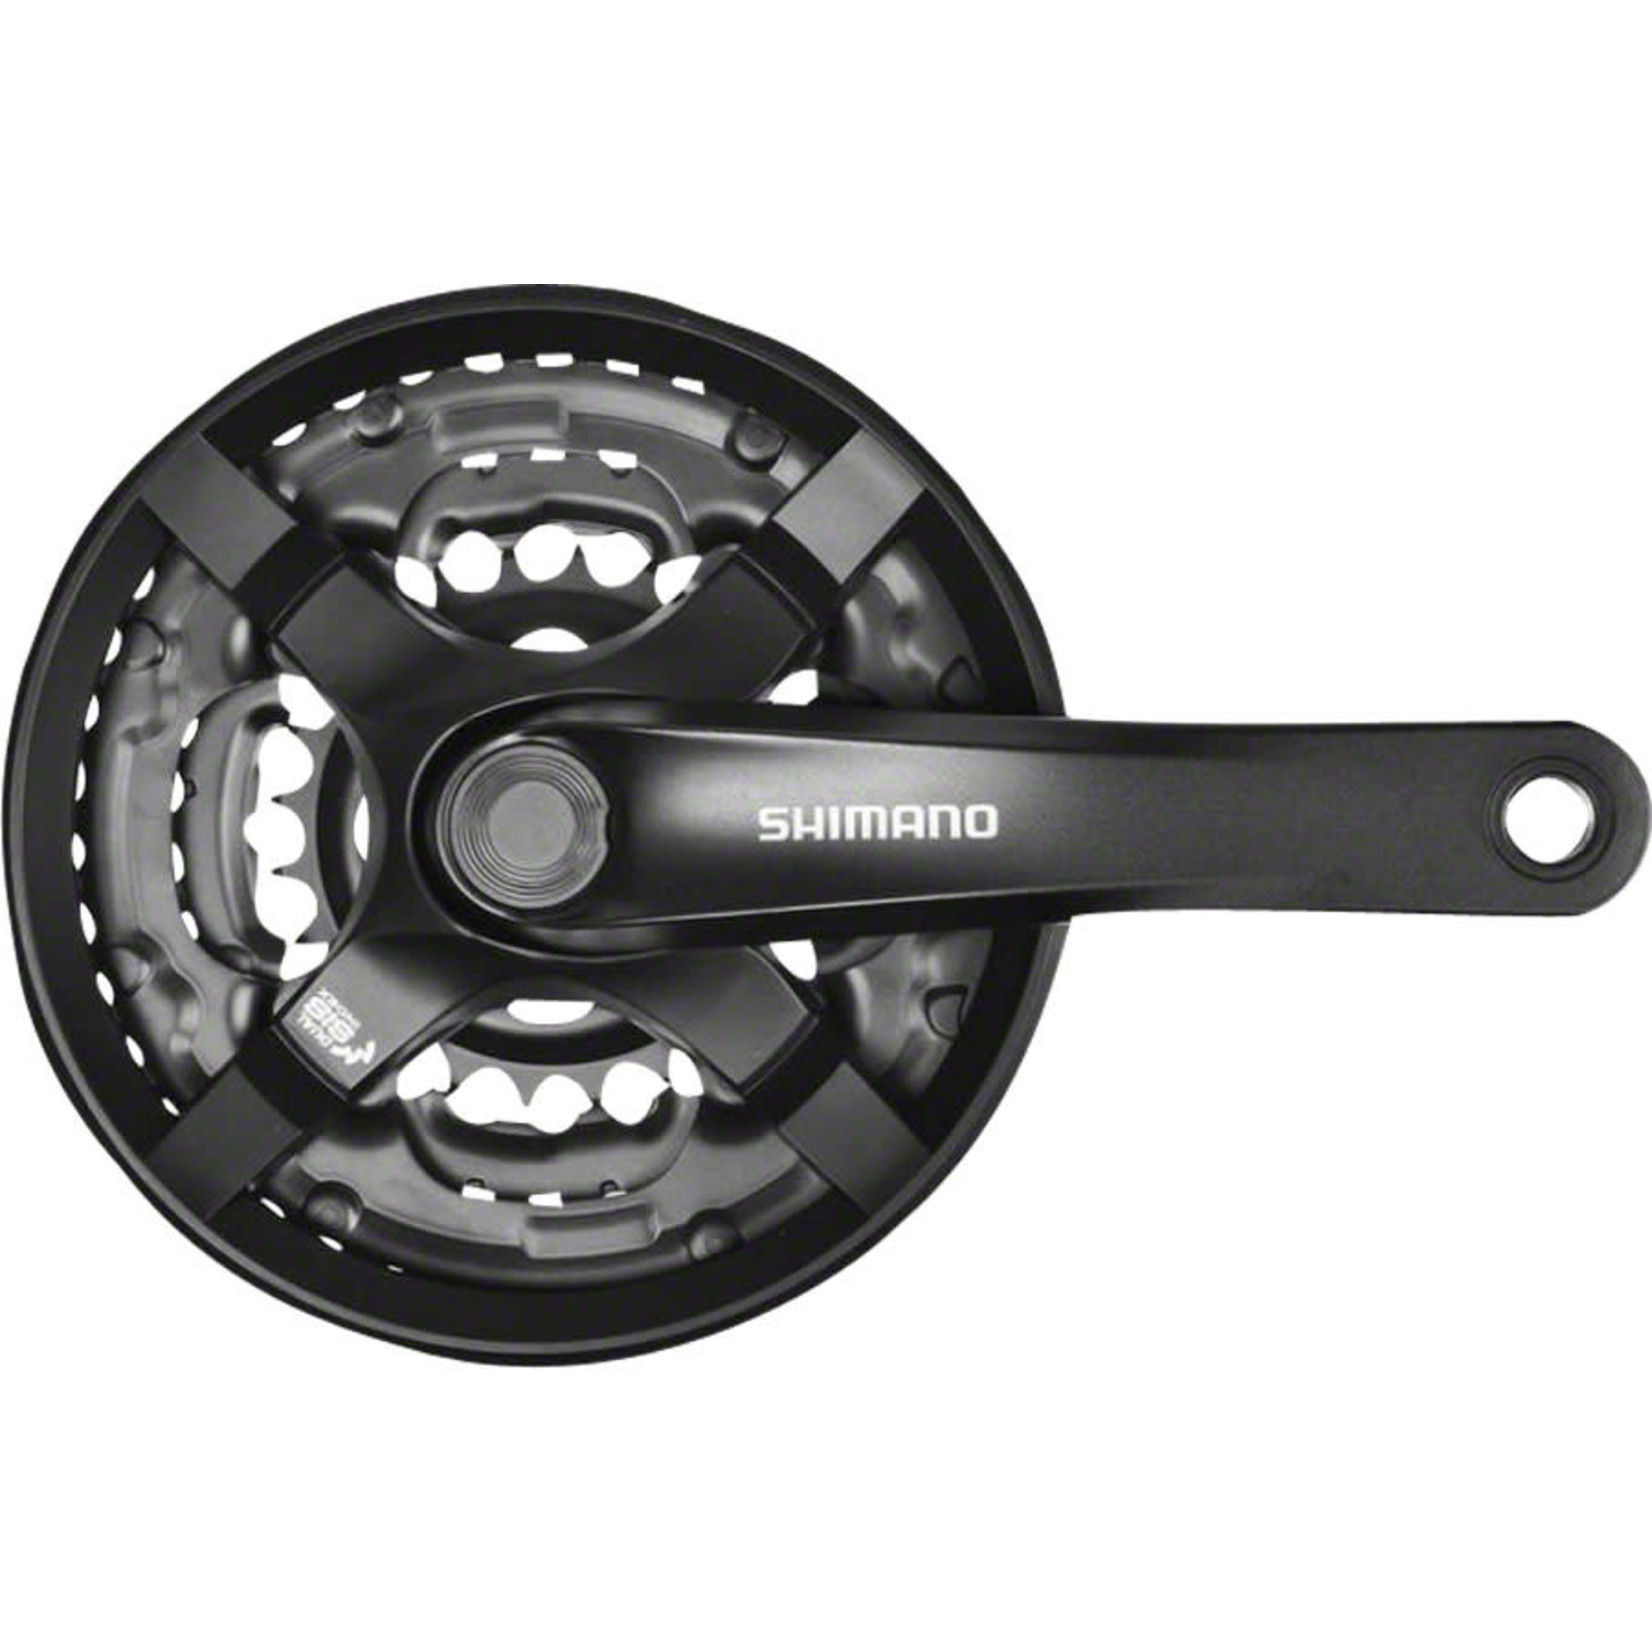 SHIMANO Shimano Tourney FC-TY501 Crankset t - 175mm, 6/7/8-Speed, 48/38/28t, Riveted, Square Taper JIS Spindle Interface, Black